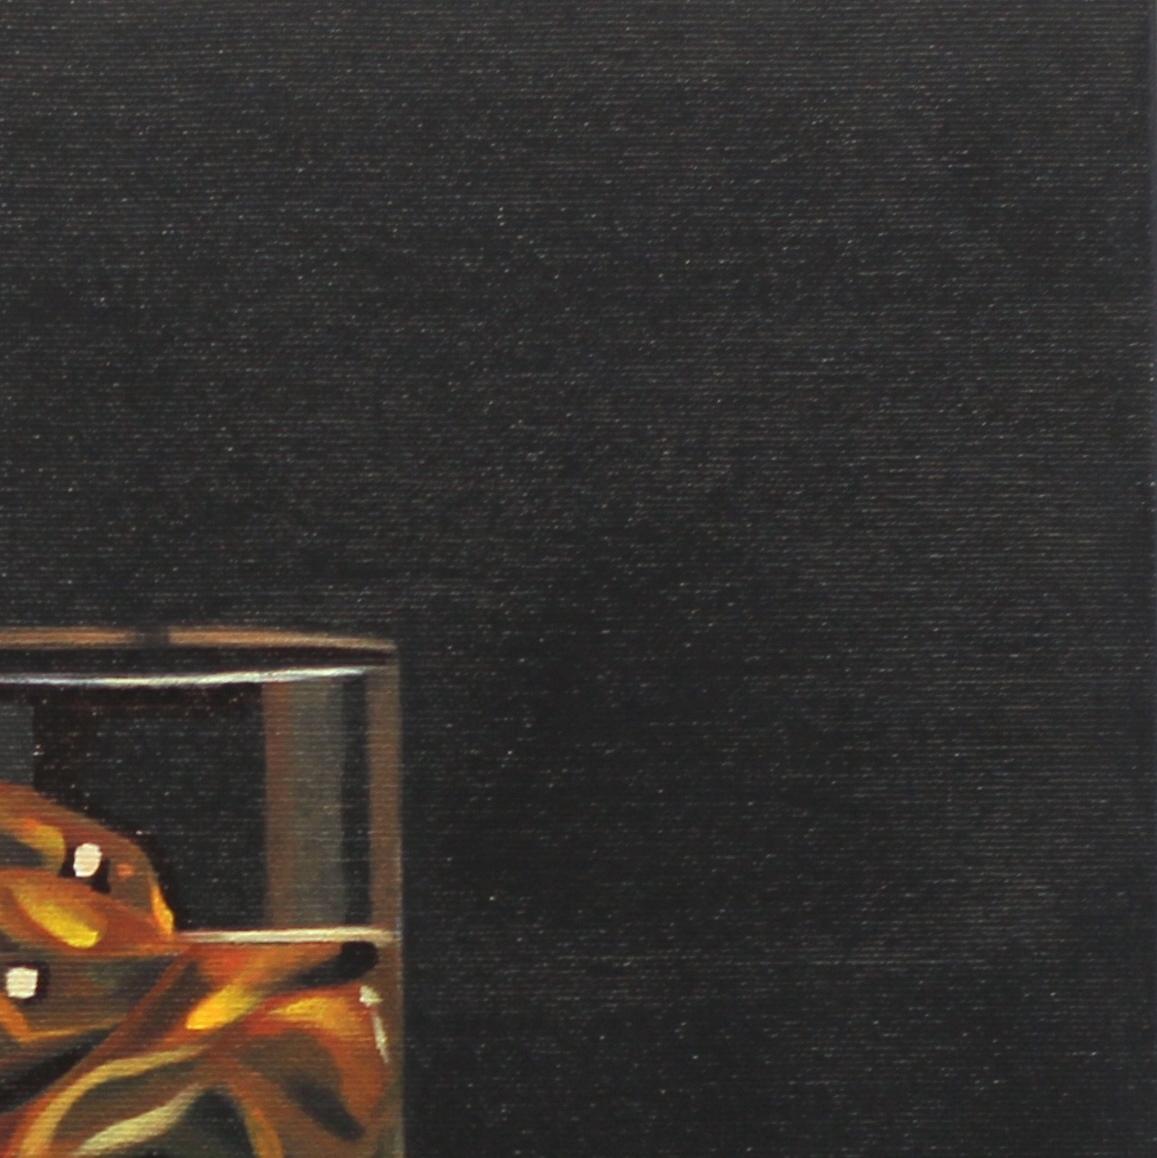 Scotch 4 - Photorealist Painting by Erin Rothstein